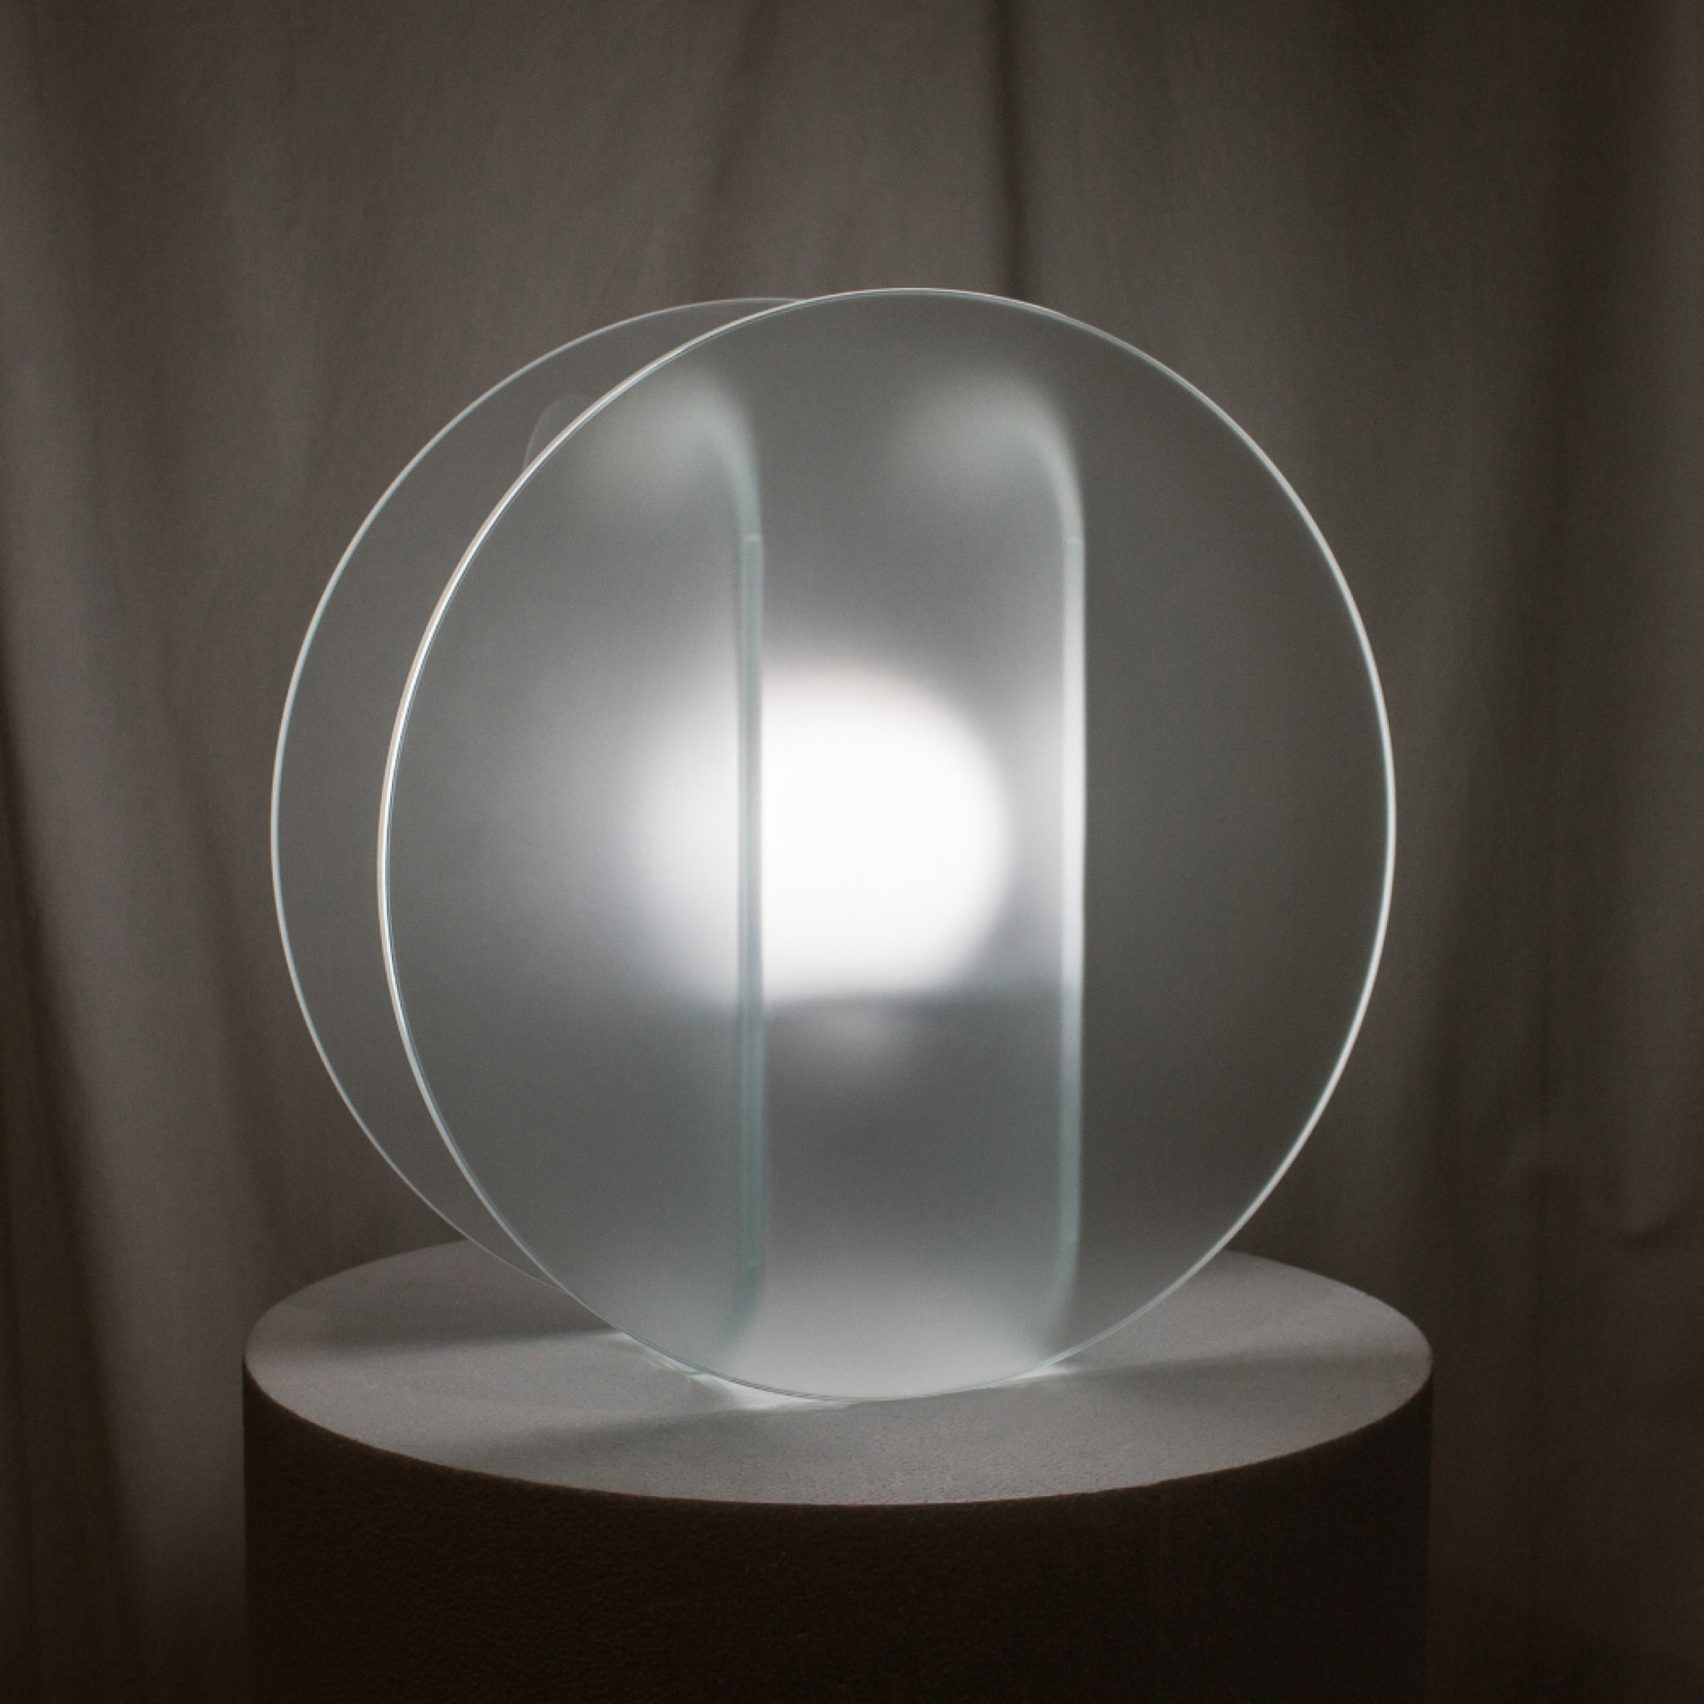 Home Office furniture - Daylight lamp